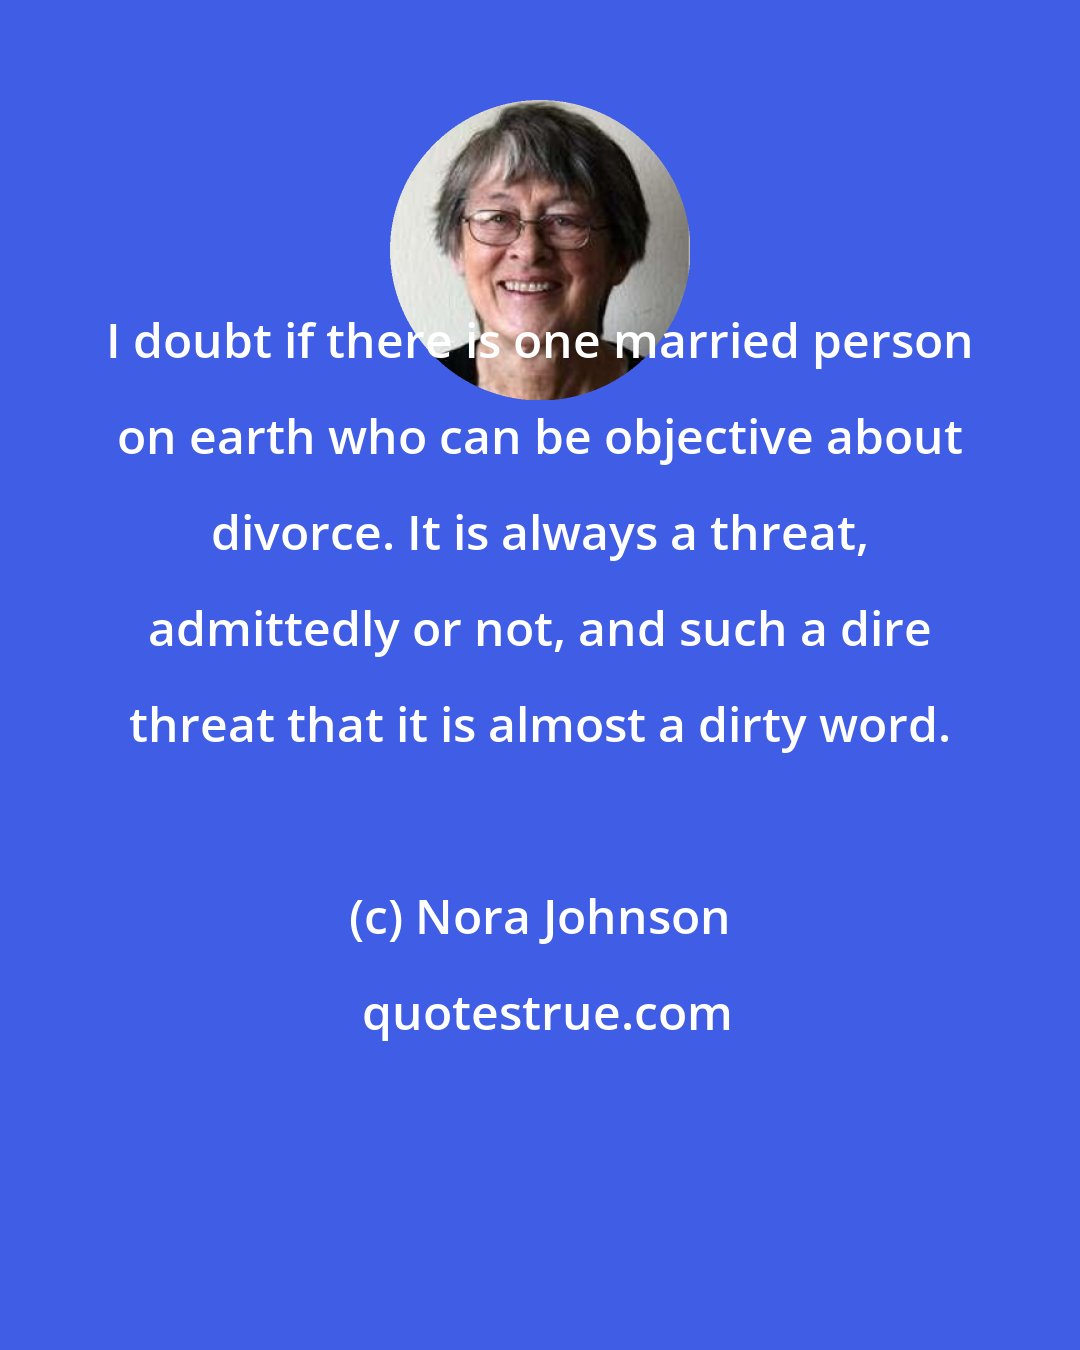 Nora Johnson: I doubt if there is one married person on earth who can be objective about divorce. It is always a threat, admittedly or not, and such a dire threat that it is almost a dirty word.